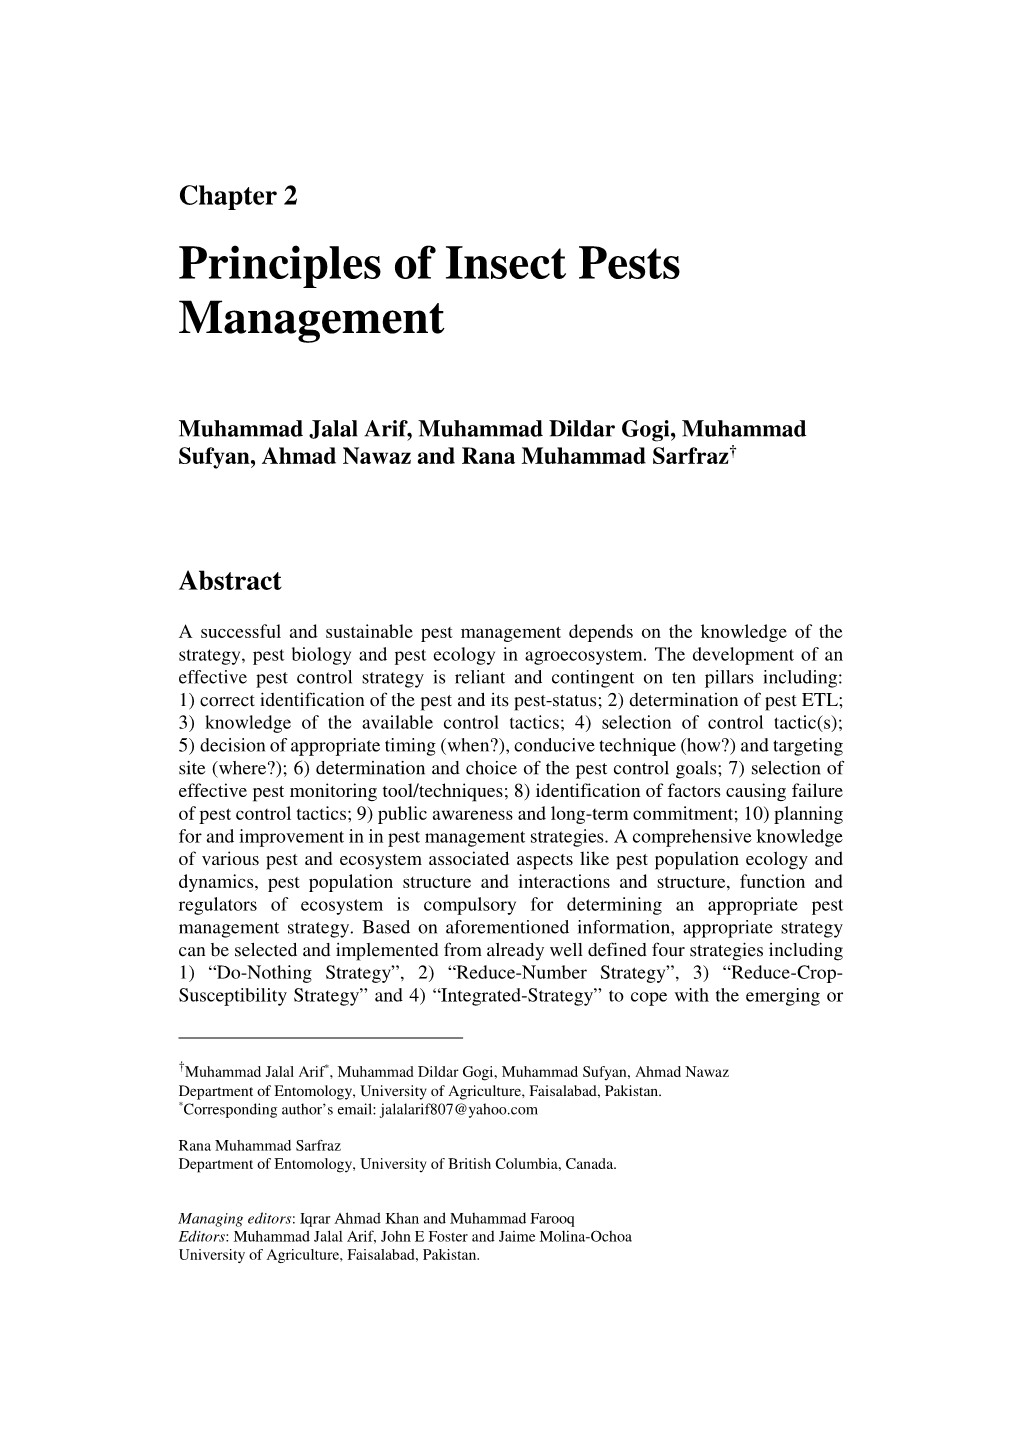 Principles of Insect Pests Management